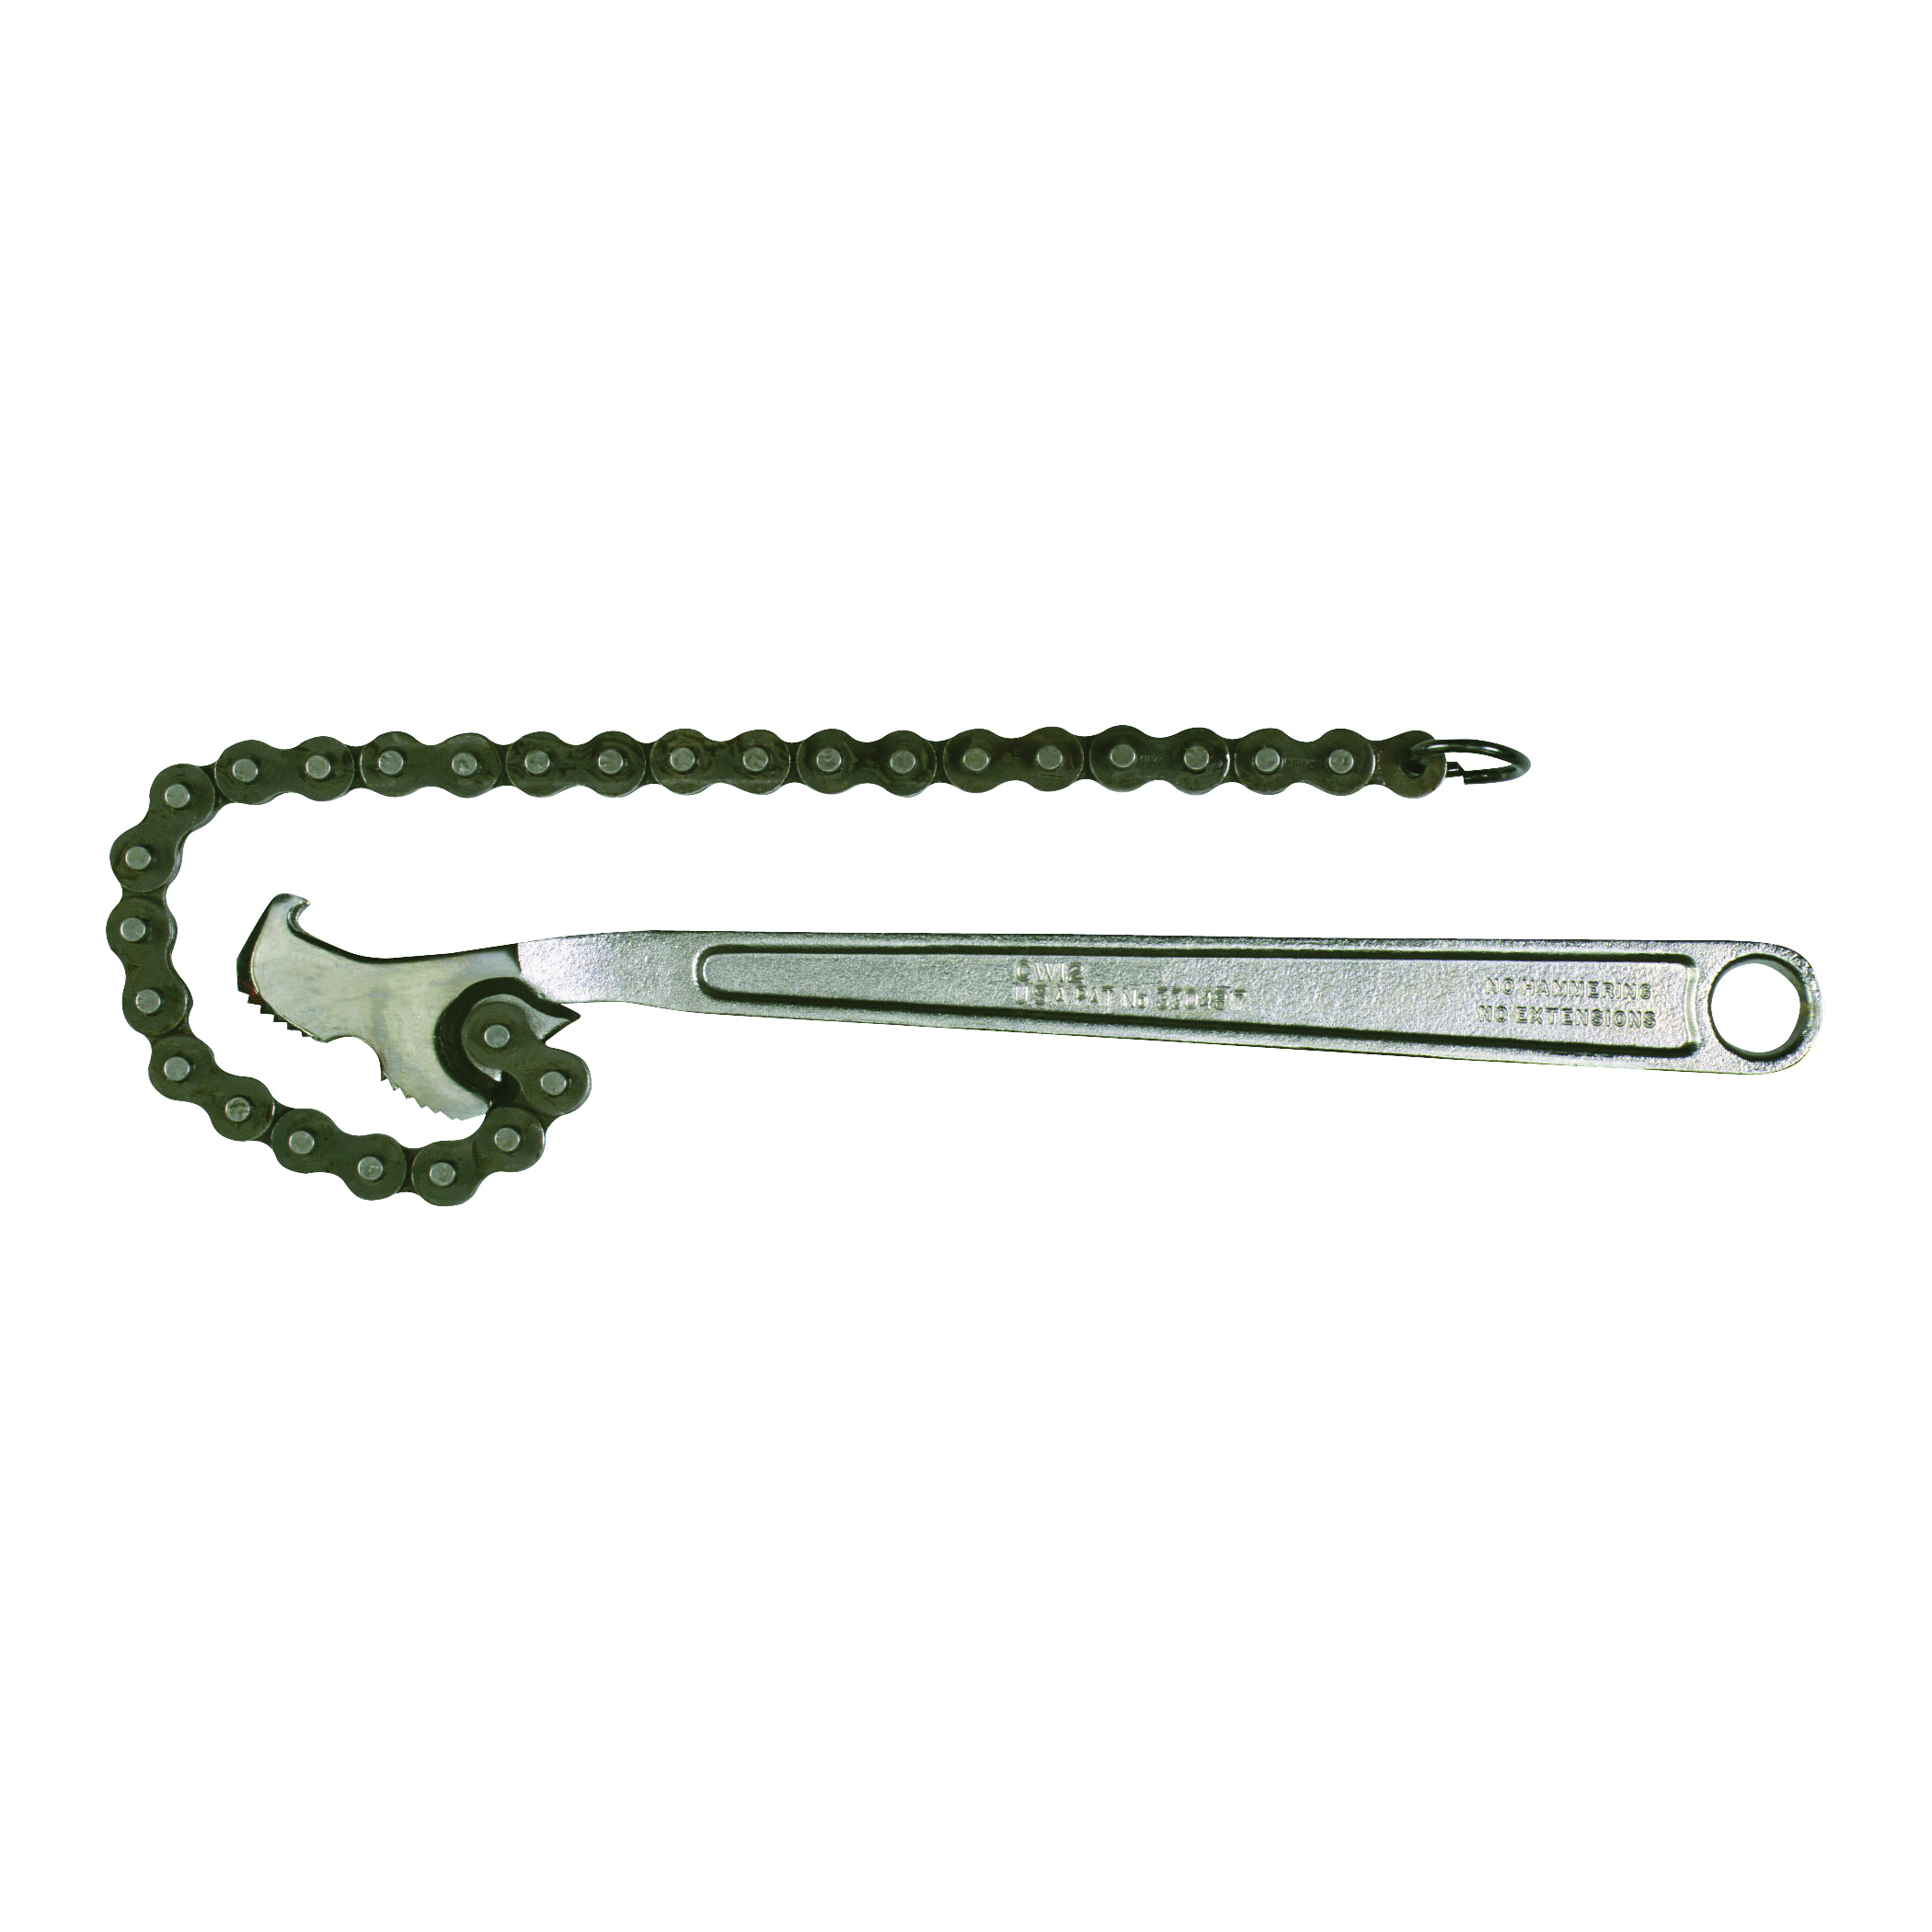 Farrier CW12H Chain Wrench, 12 in L, Steel, Nickel Chrome